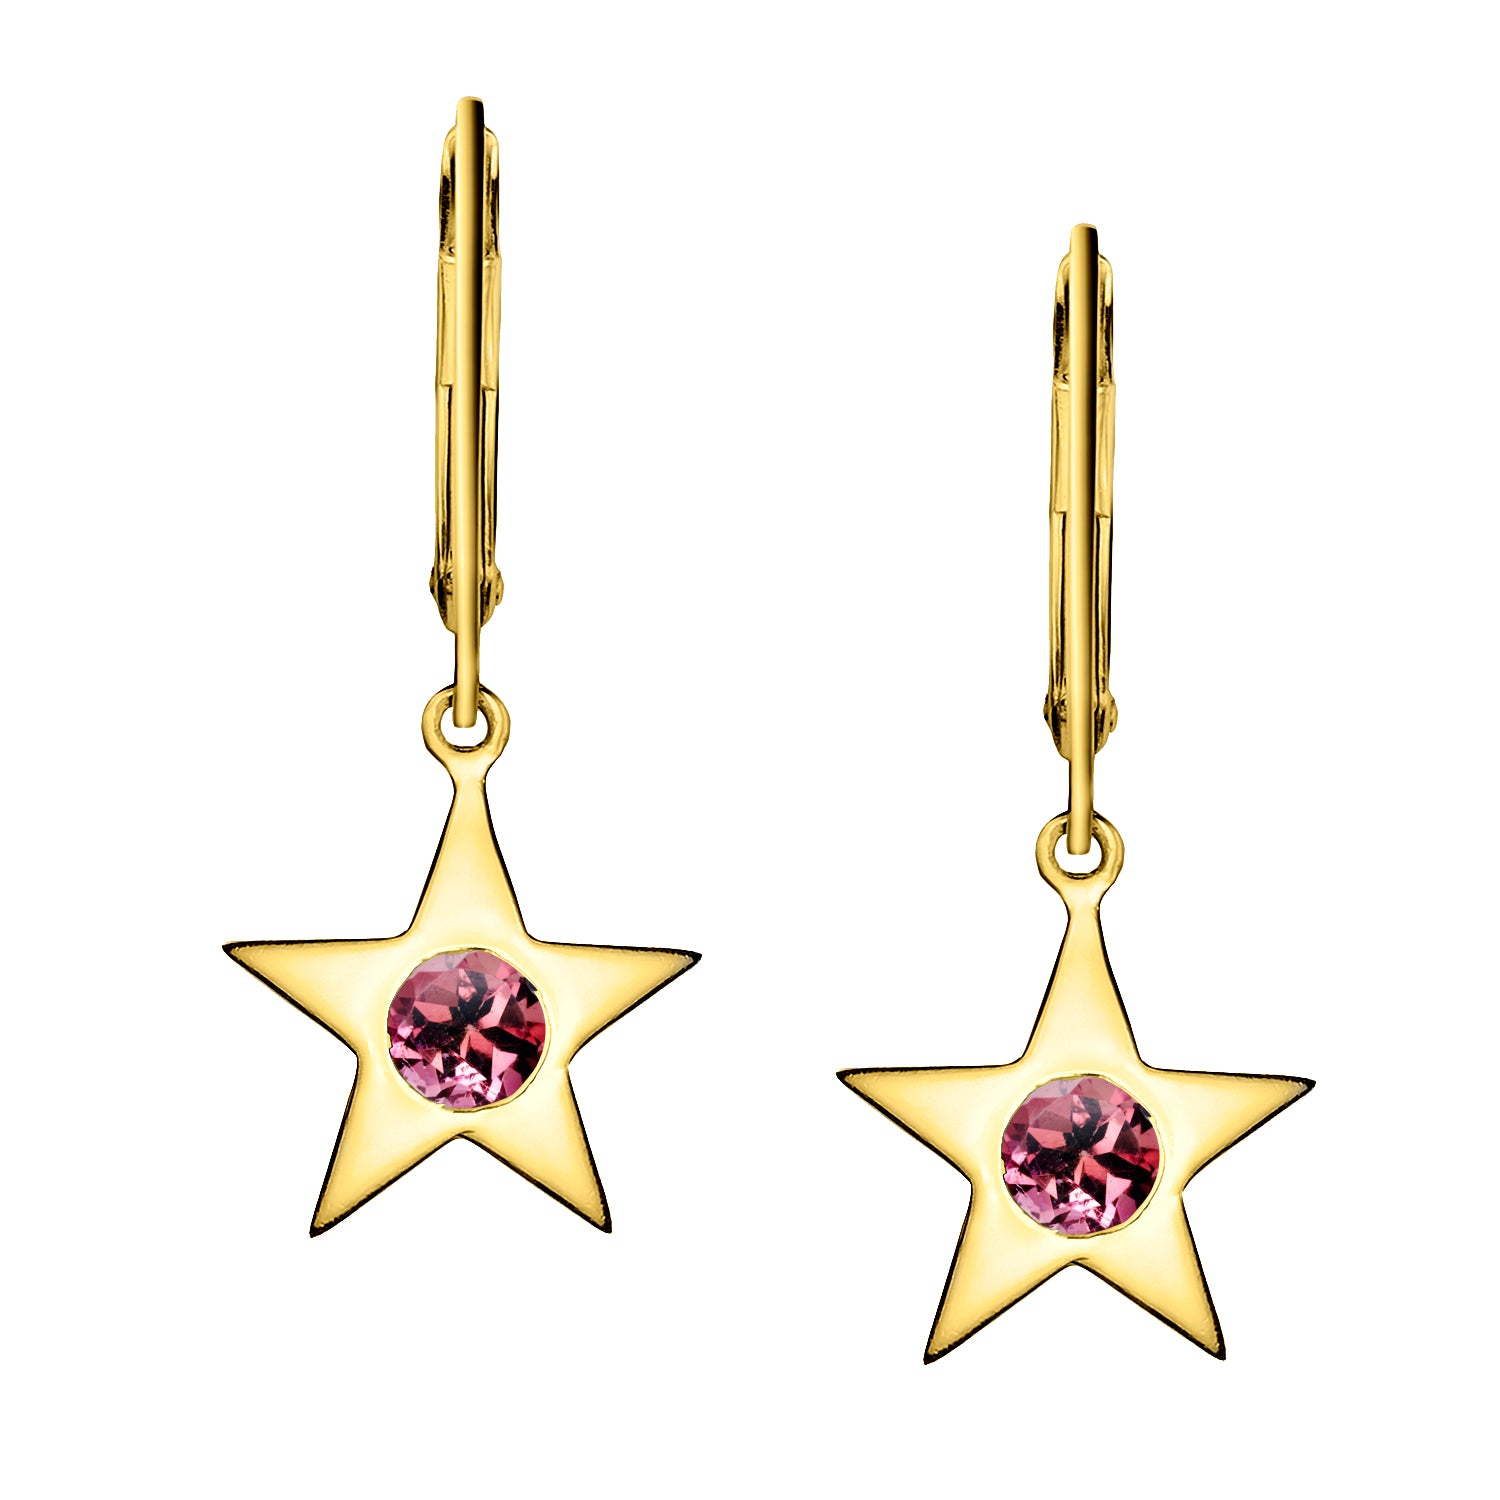 Polished Gold Vermeil Star Birthstone Earrings - October / Pink Tourmaline